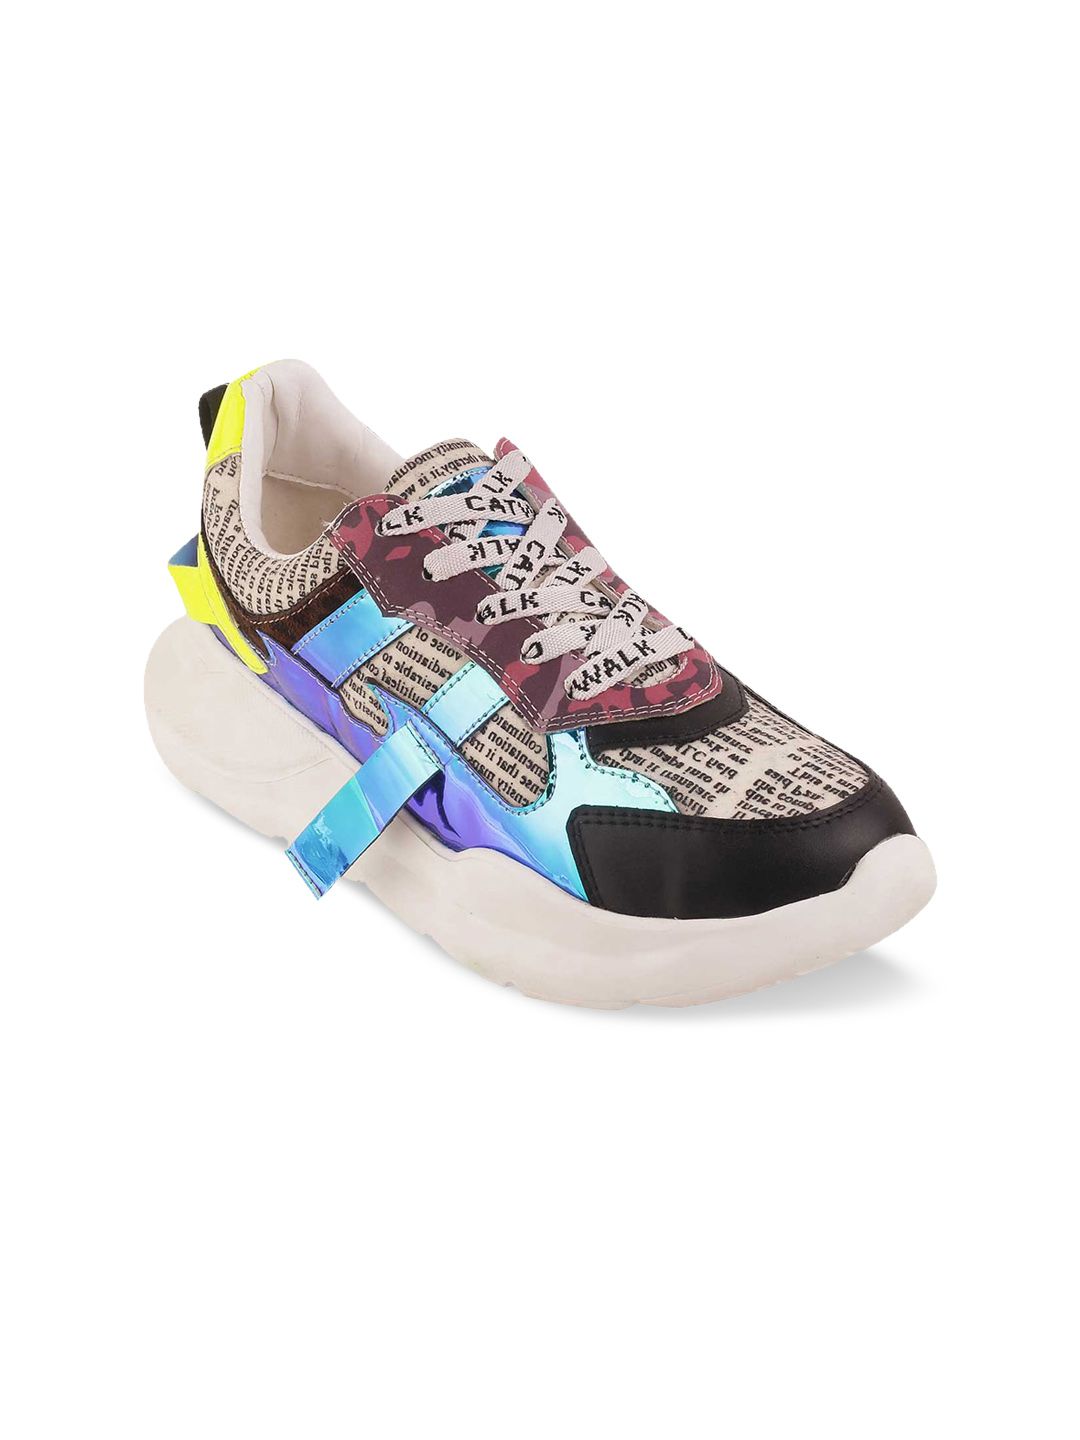 Catwalk Women Assorted Colourblocked Sneakers Price in India